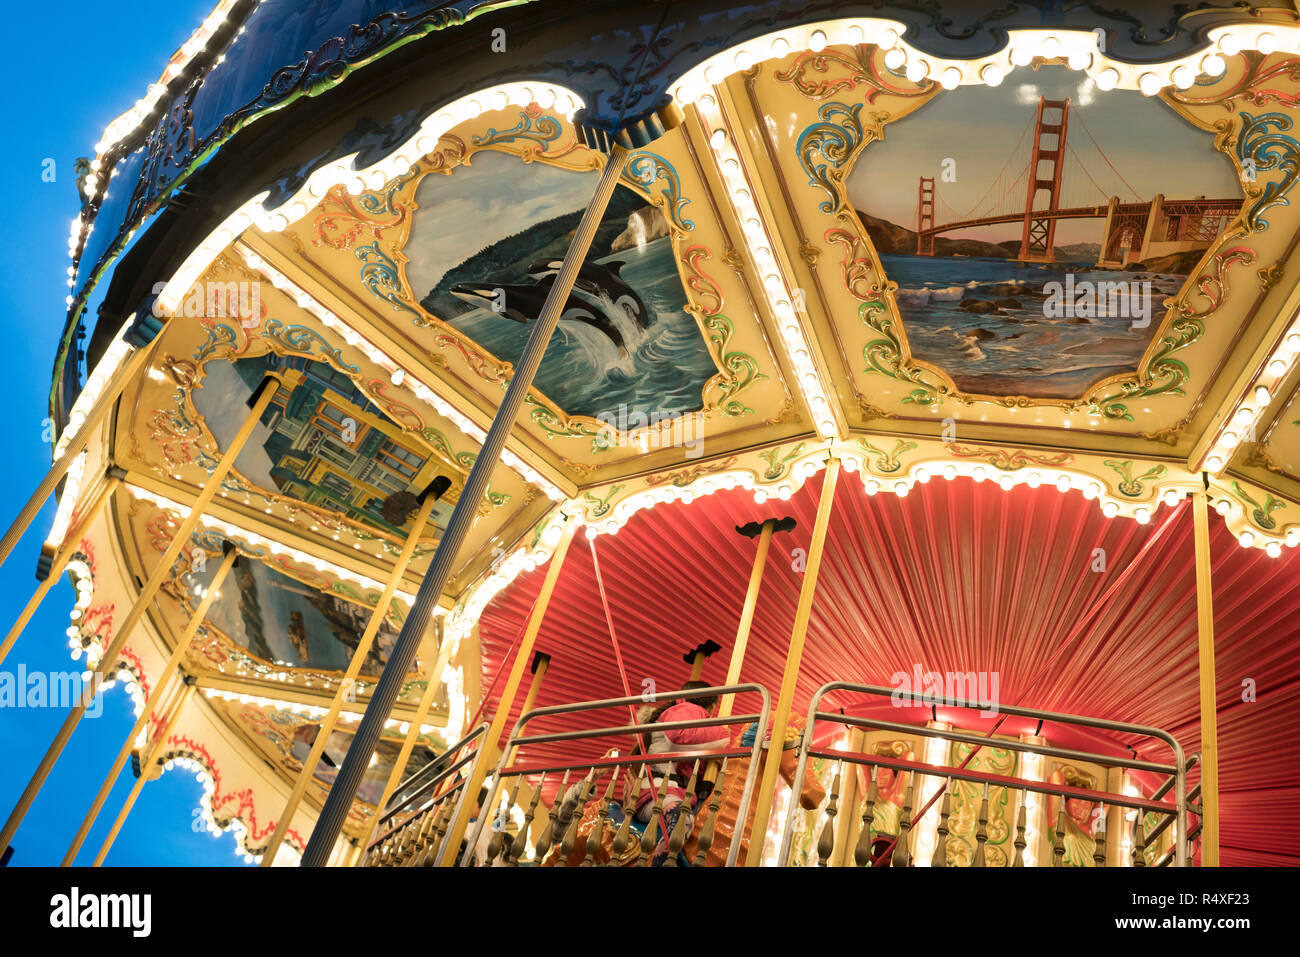 An old carousel, painted with life scenes of San Francisco in an end-of-day light, Pier 39, San Francisco, California, USA Stock Photo